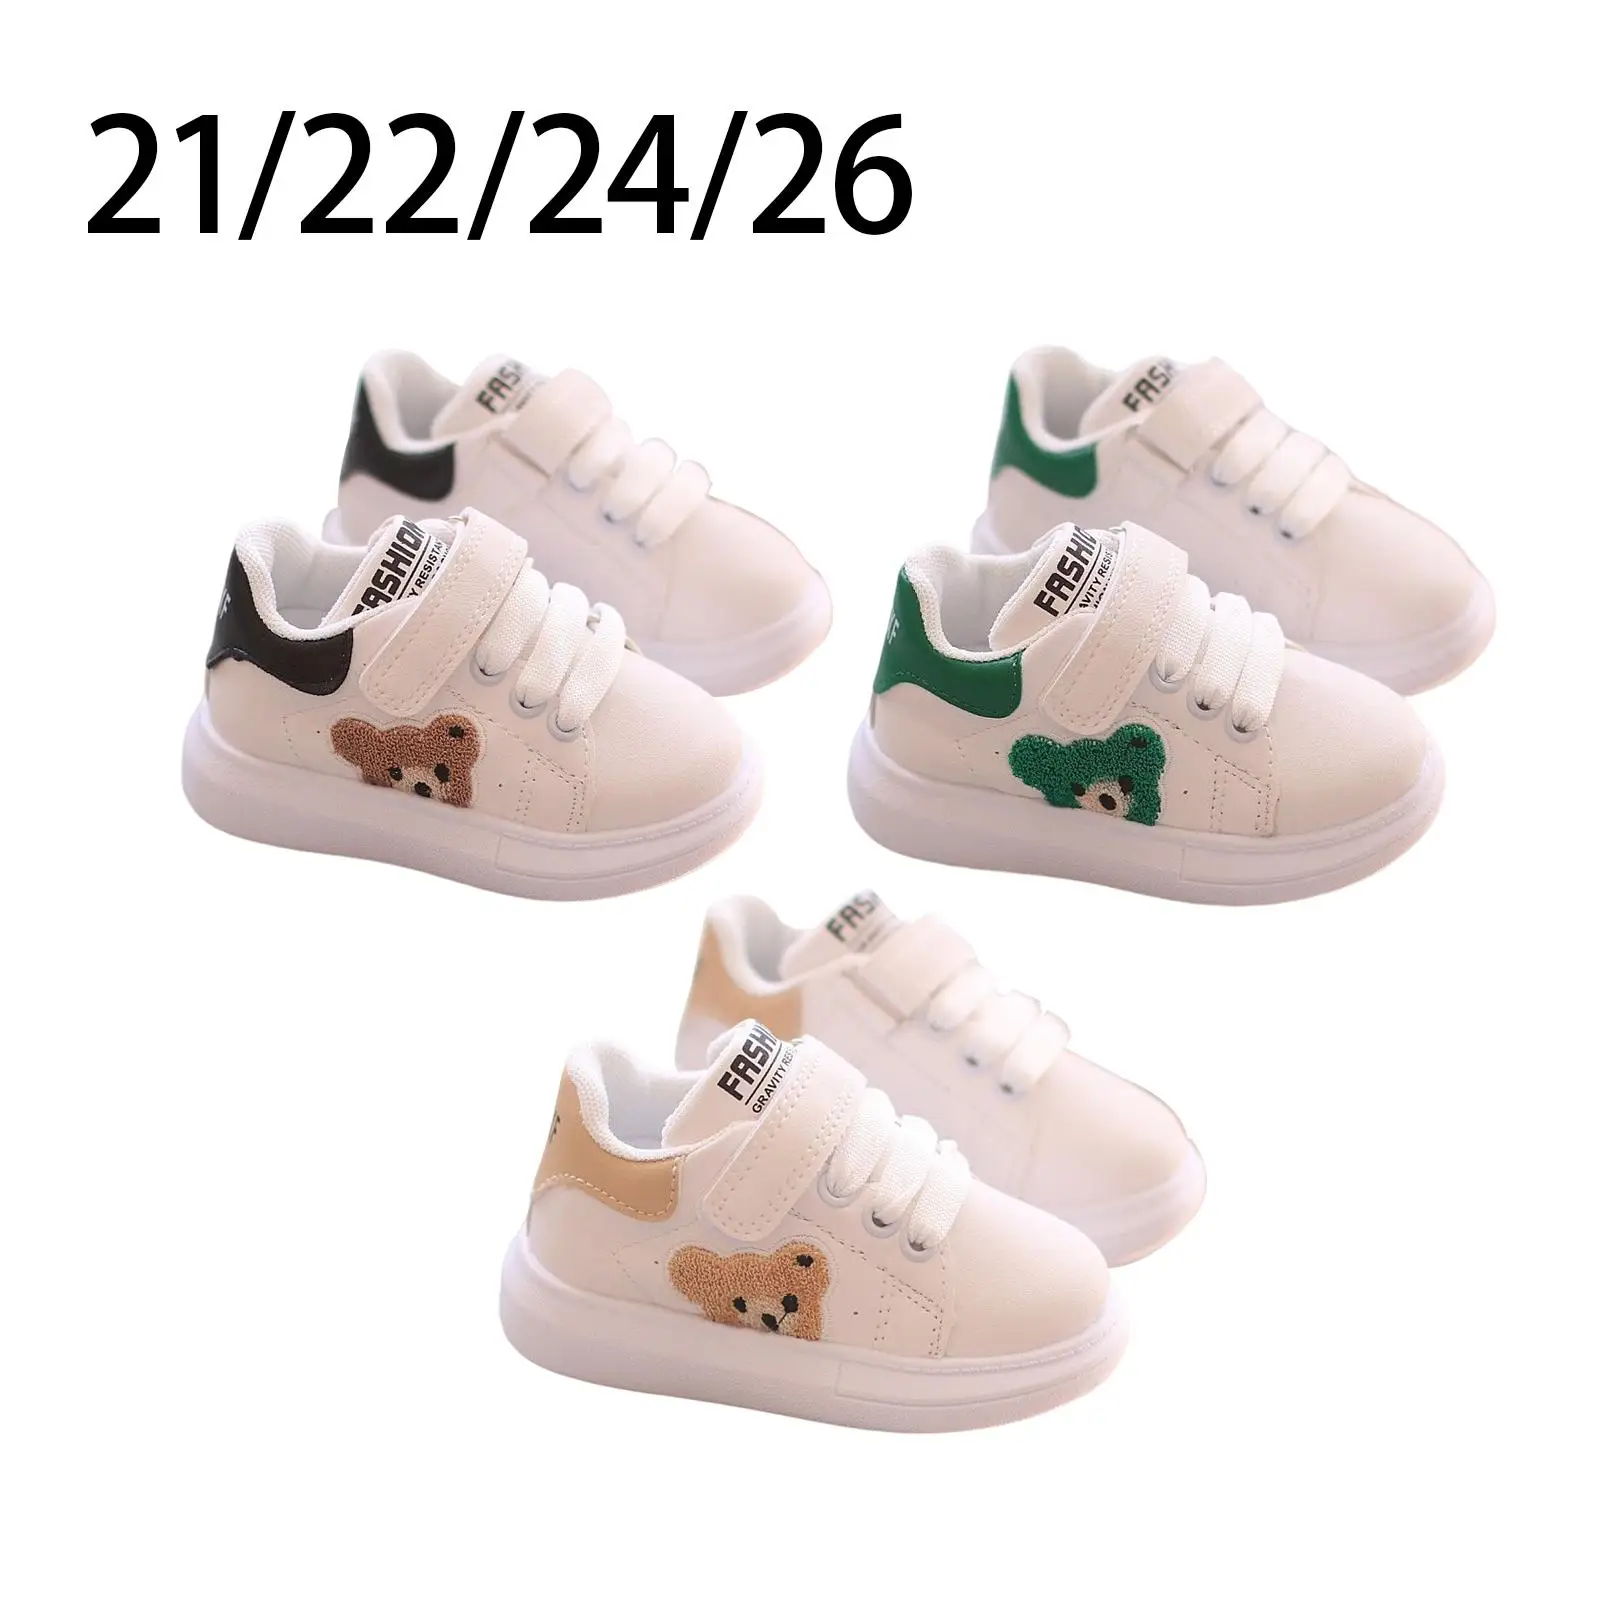 Nonslip Infant Sneakers Flat Shoes Casual with Bear Embroidery Crib Trainers Soft PU Leather Walking Shoes for Kids Unisex Child